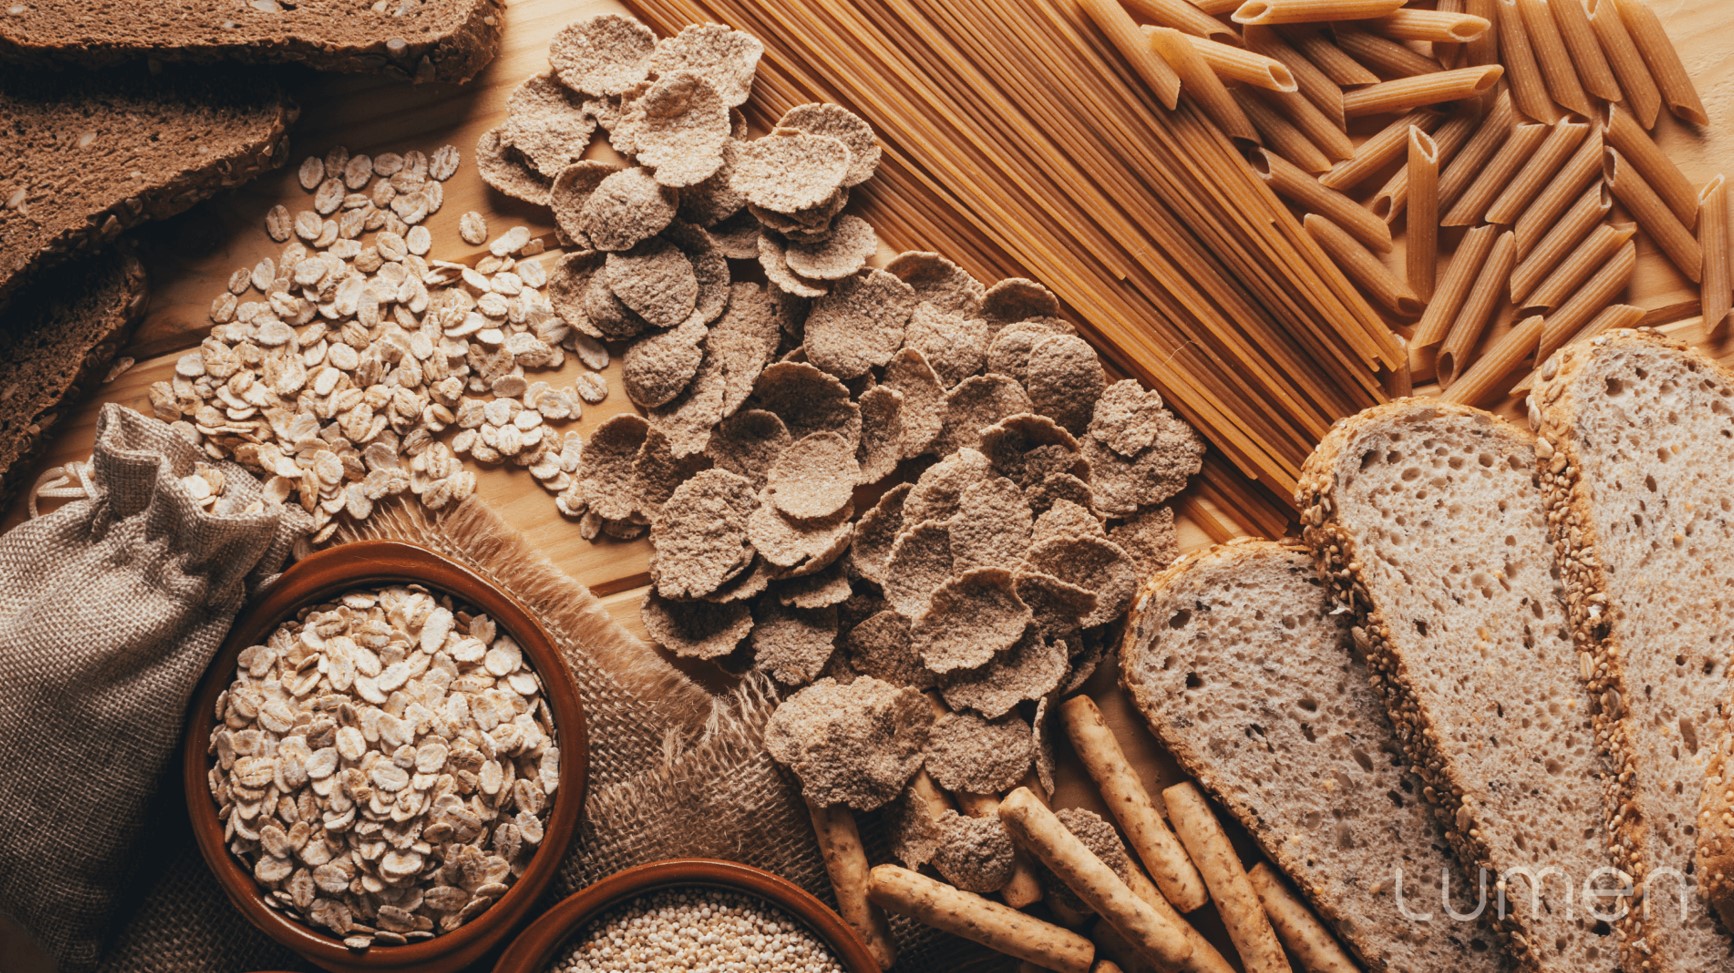 Carbohydrates: Benefits, Types, Sources and Side Effects | HealthShots